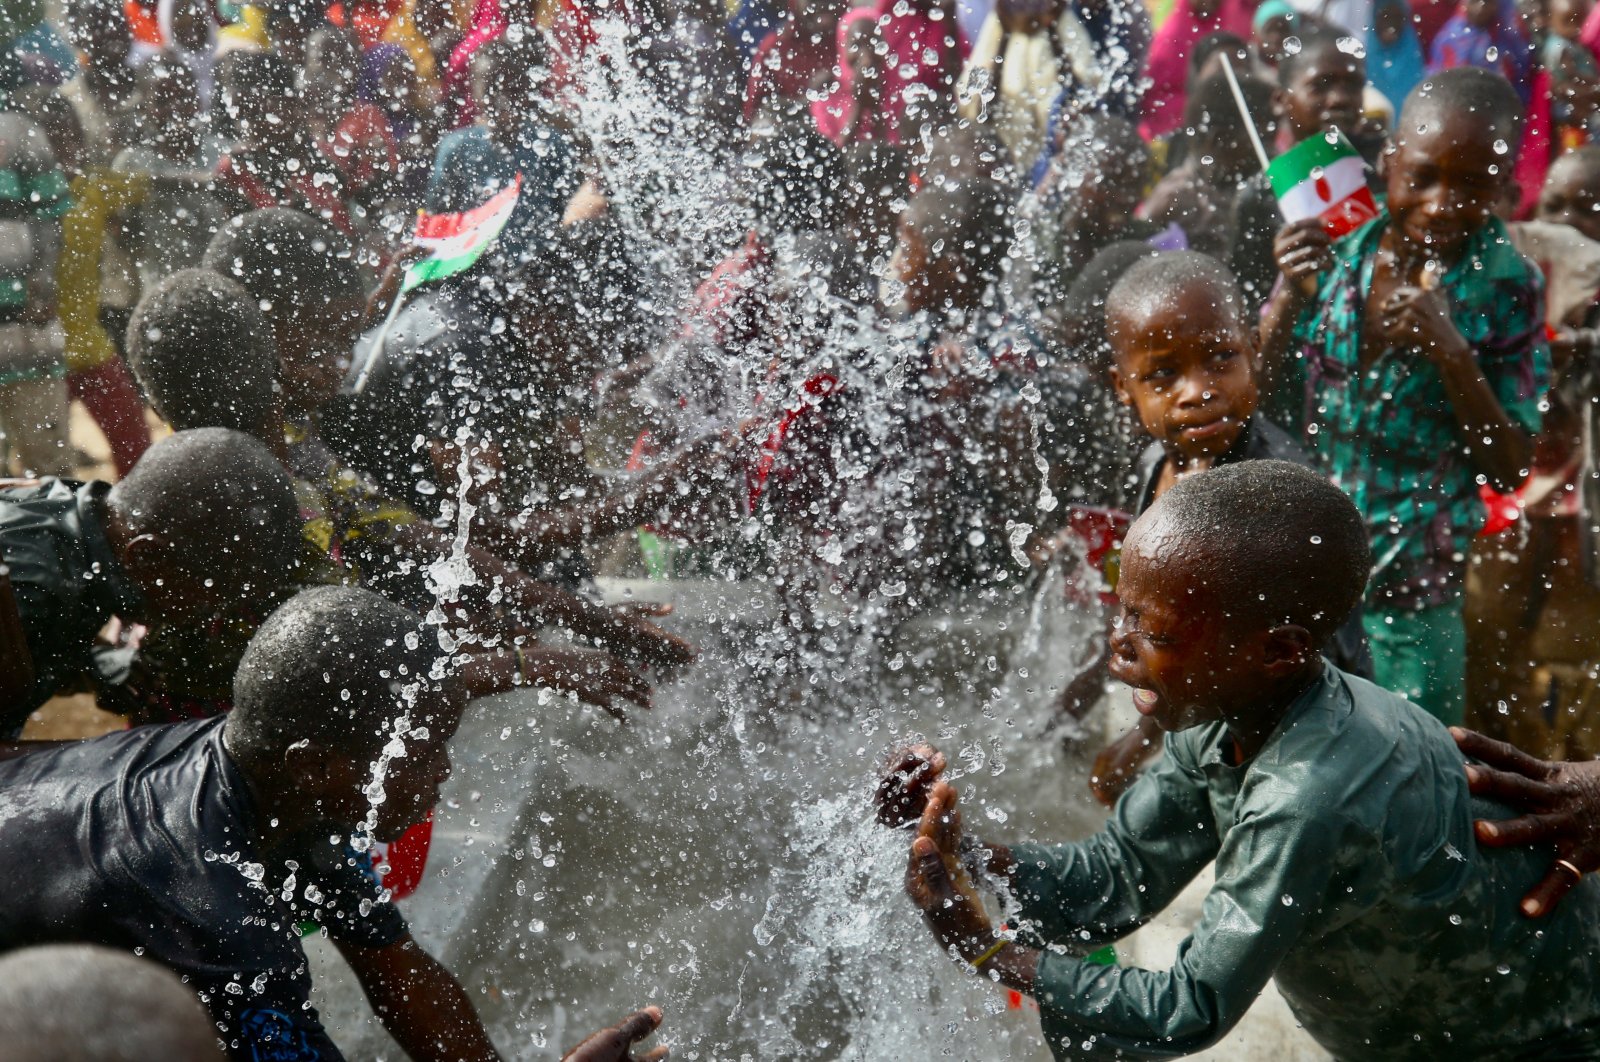 Children play with water at the well opened by TDV, in Maradi, Niger, March 25, 2022. (AA PHOTO)